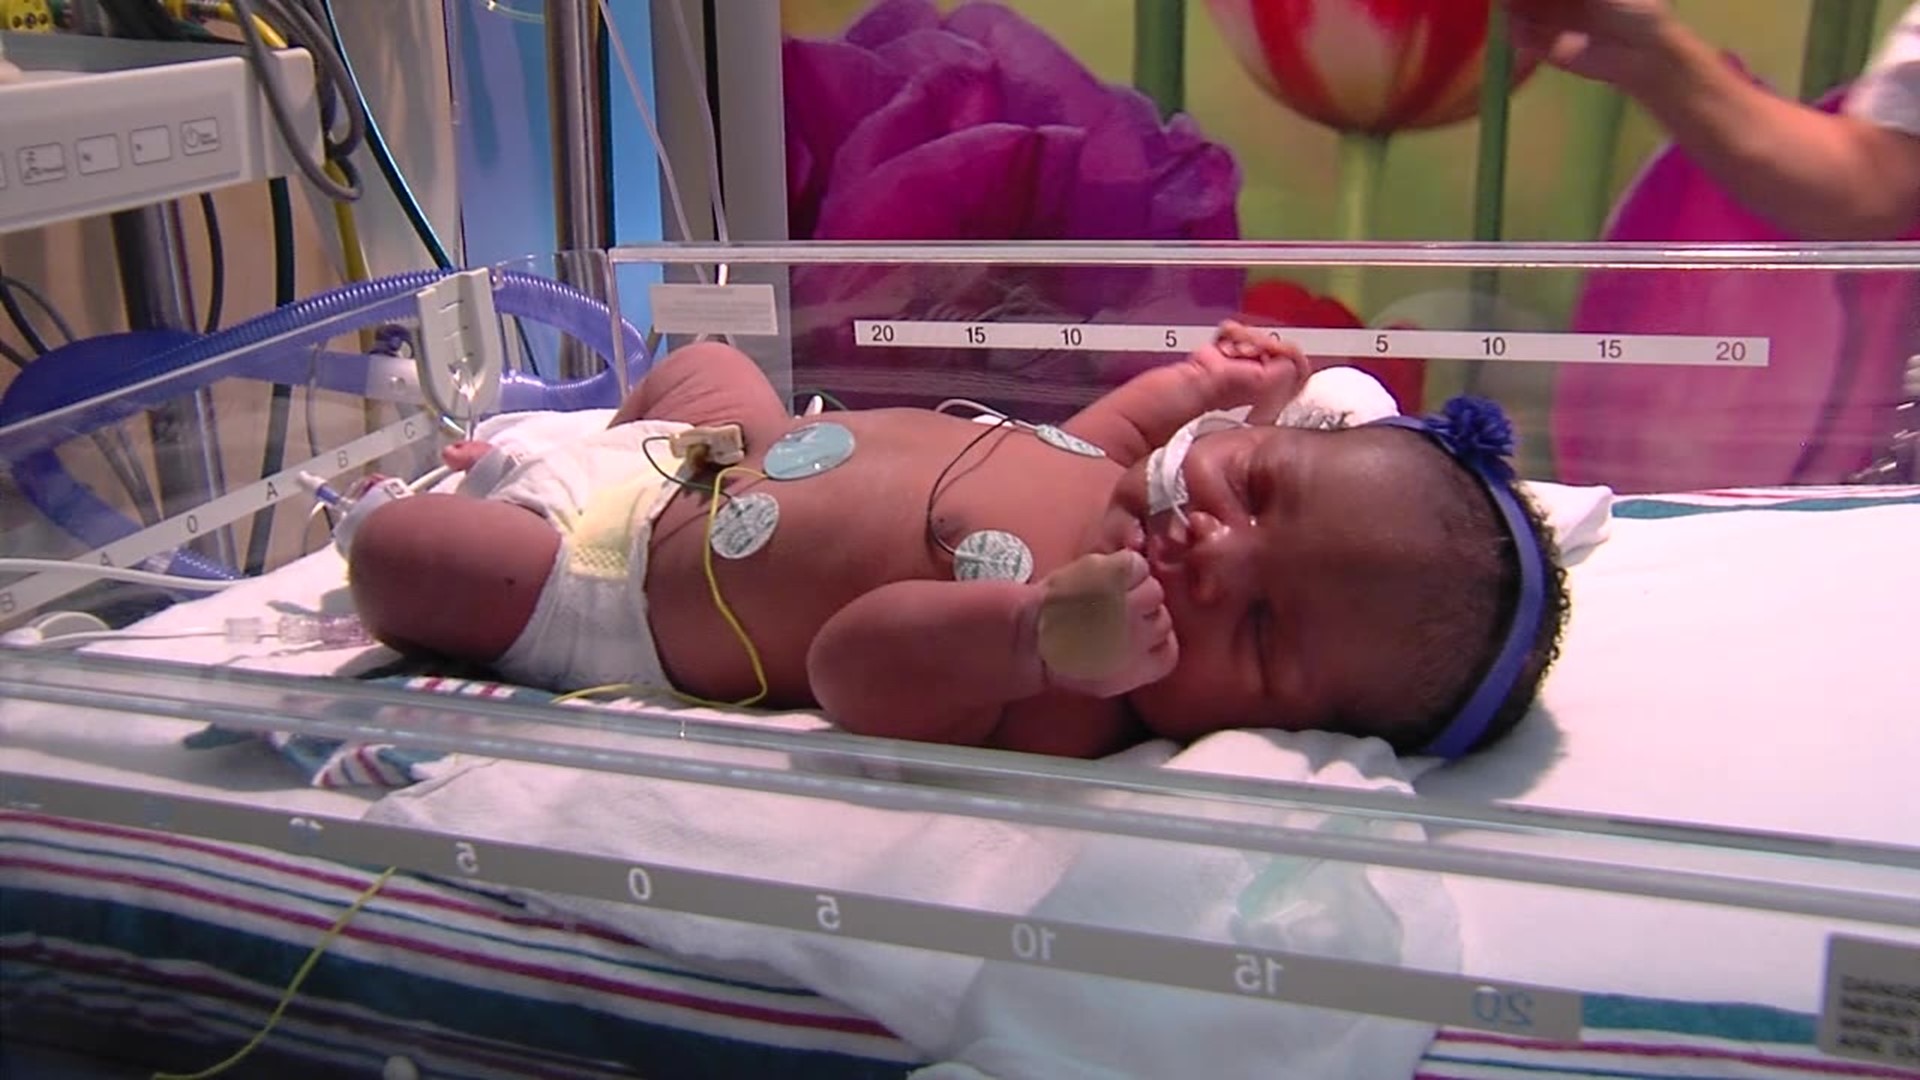 WEB EXTRA: Baby girl born at 9:11 p.m. on 9/11 weighing 9 pounds 11 ounces